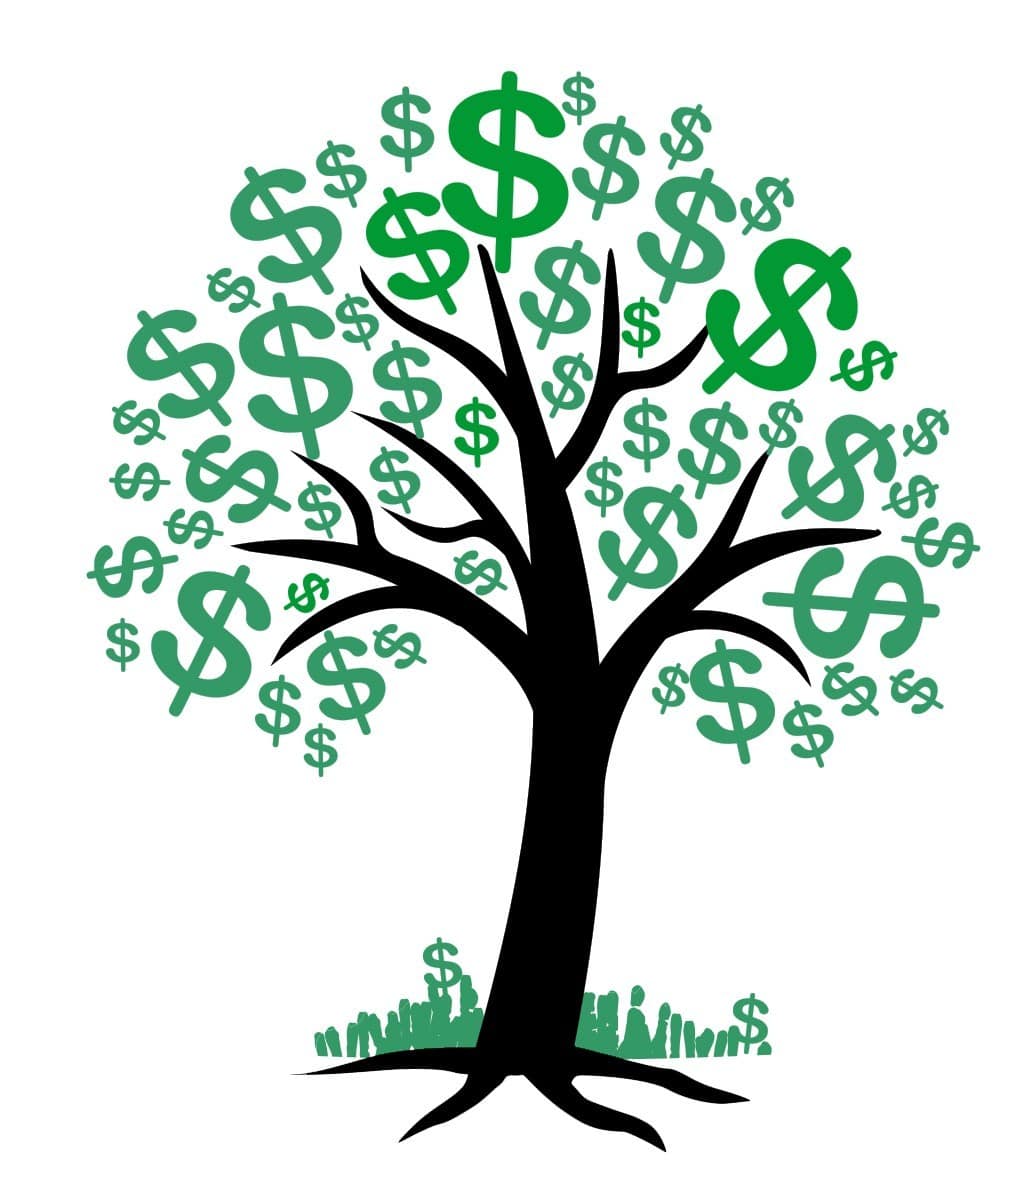 Planting your wealth tree